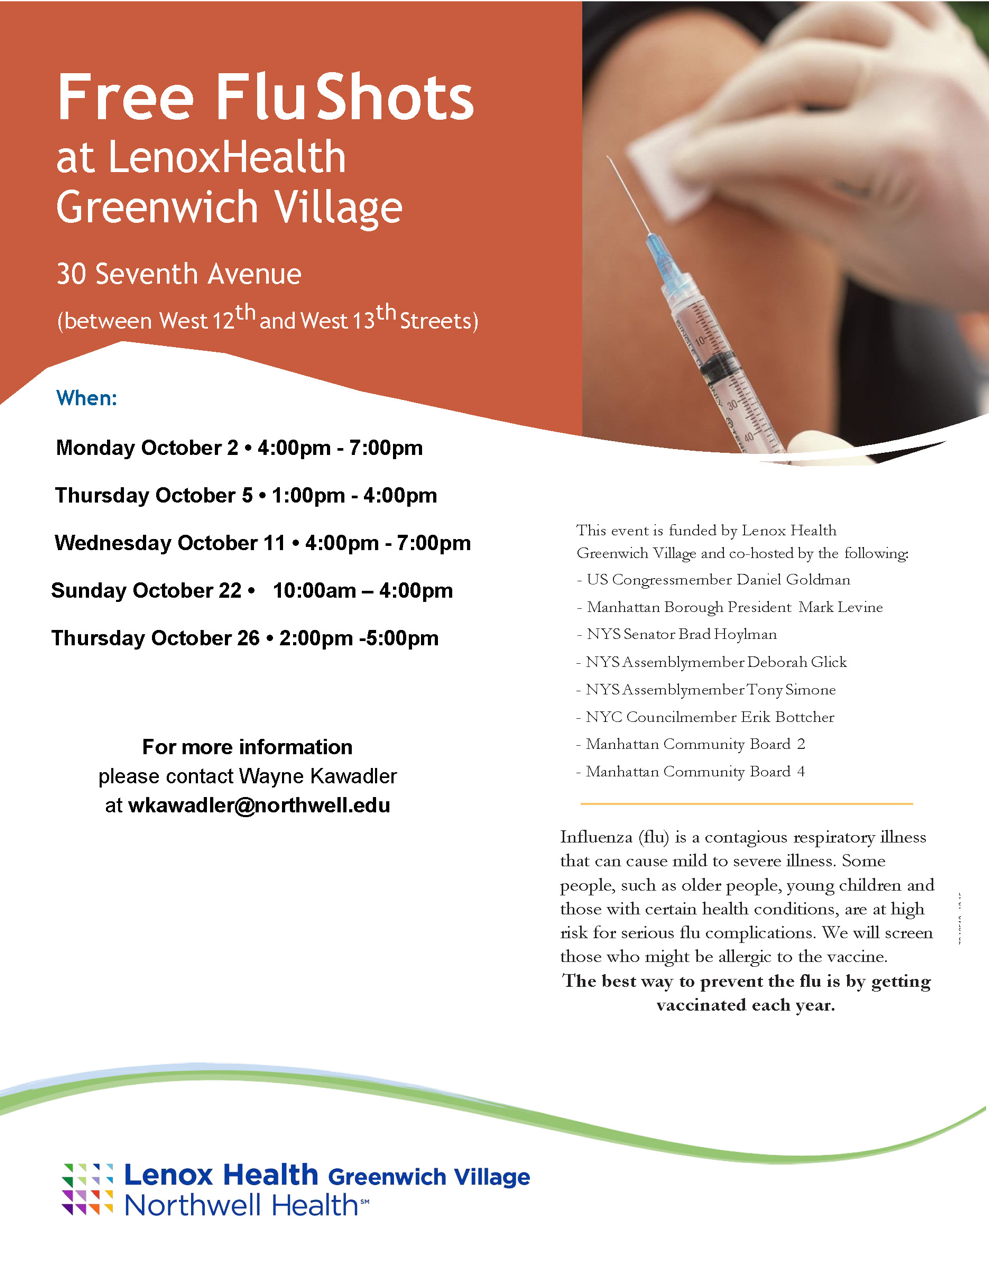 The image displays a Greenwich Village flyer advertising free flu shots at "LenoxHealth," 30 Seventh Avenue, with prominent co-hosts. Contact Wayne Kawadler at "wkawadler@northwell.edu" for details. The flyer emphasizes the importance of annual flu vaccination and features logos for Lenox Health Greenwich Village and Northwell Health.